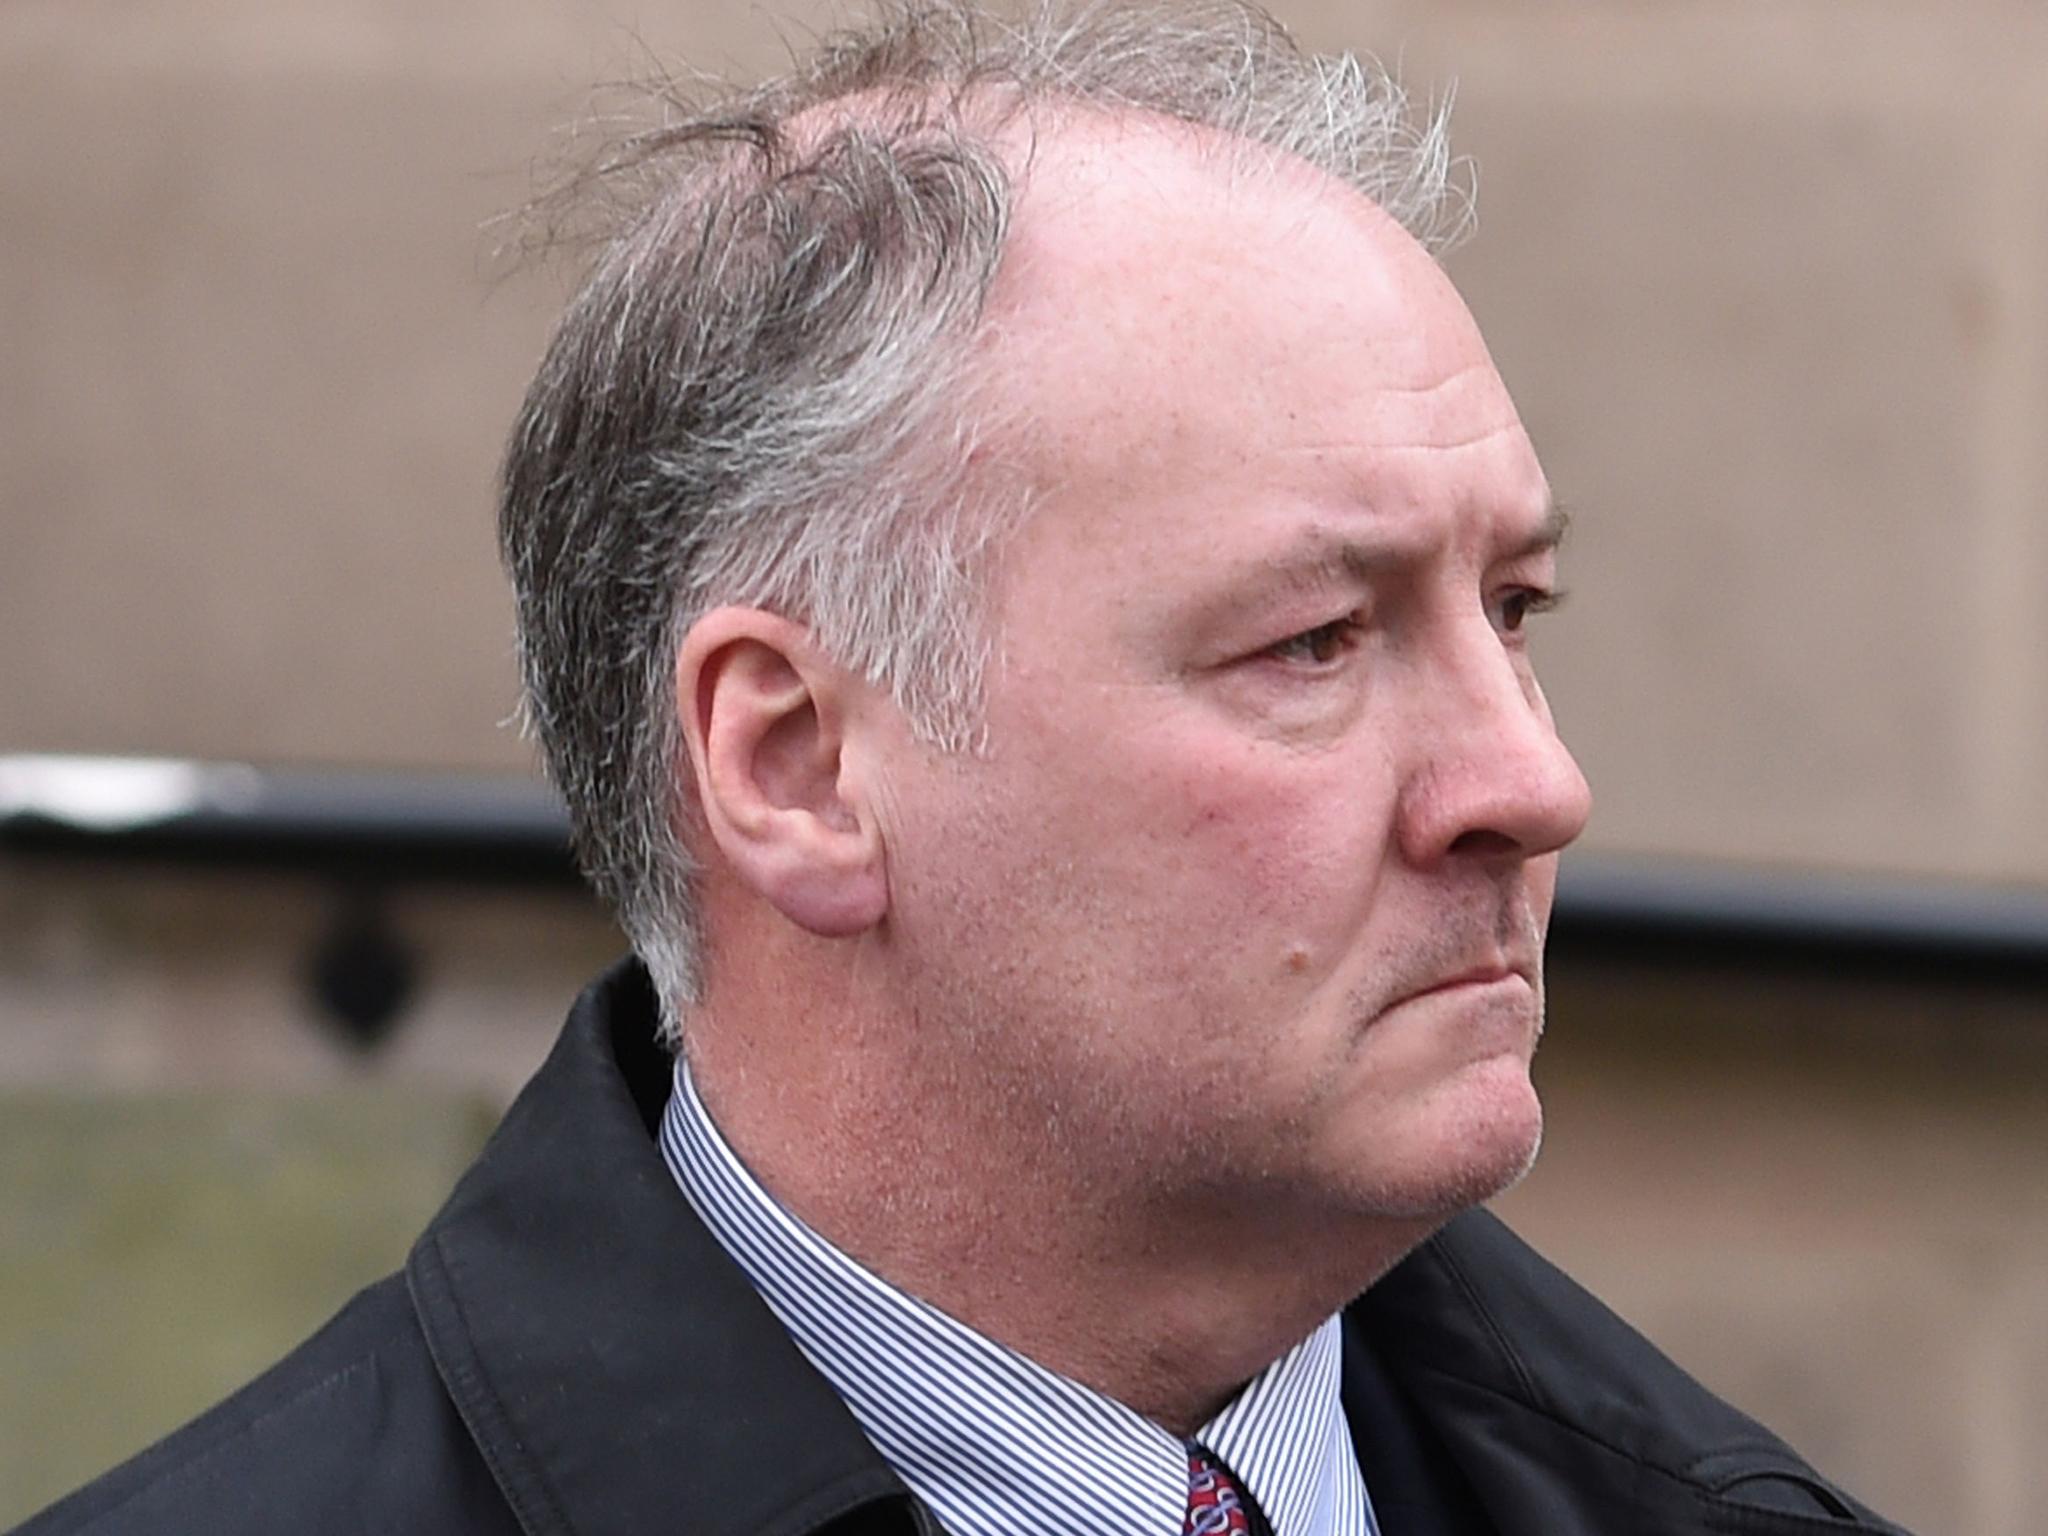 Ian Paterson performed unnecessary operations on more than 1,000 patients in NHS and private hospitals